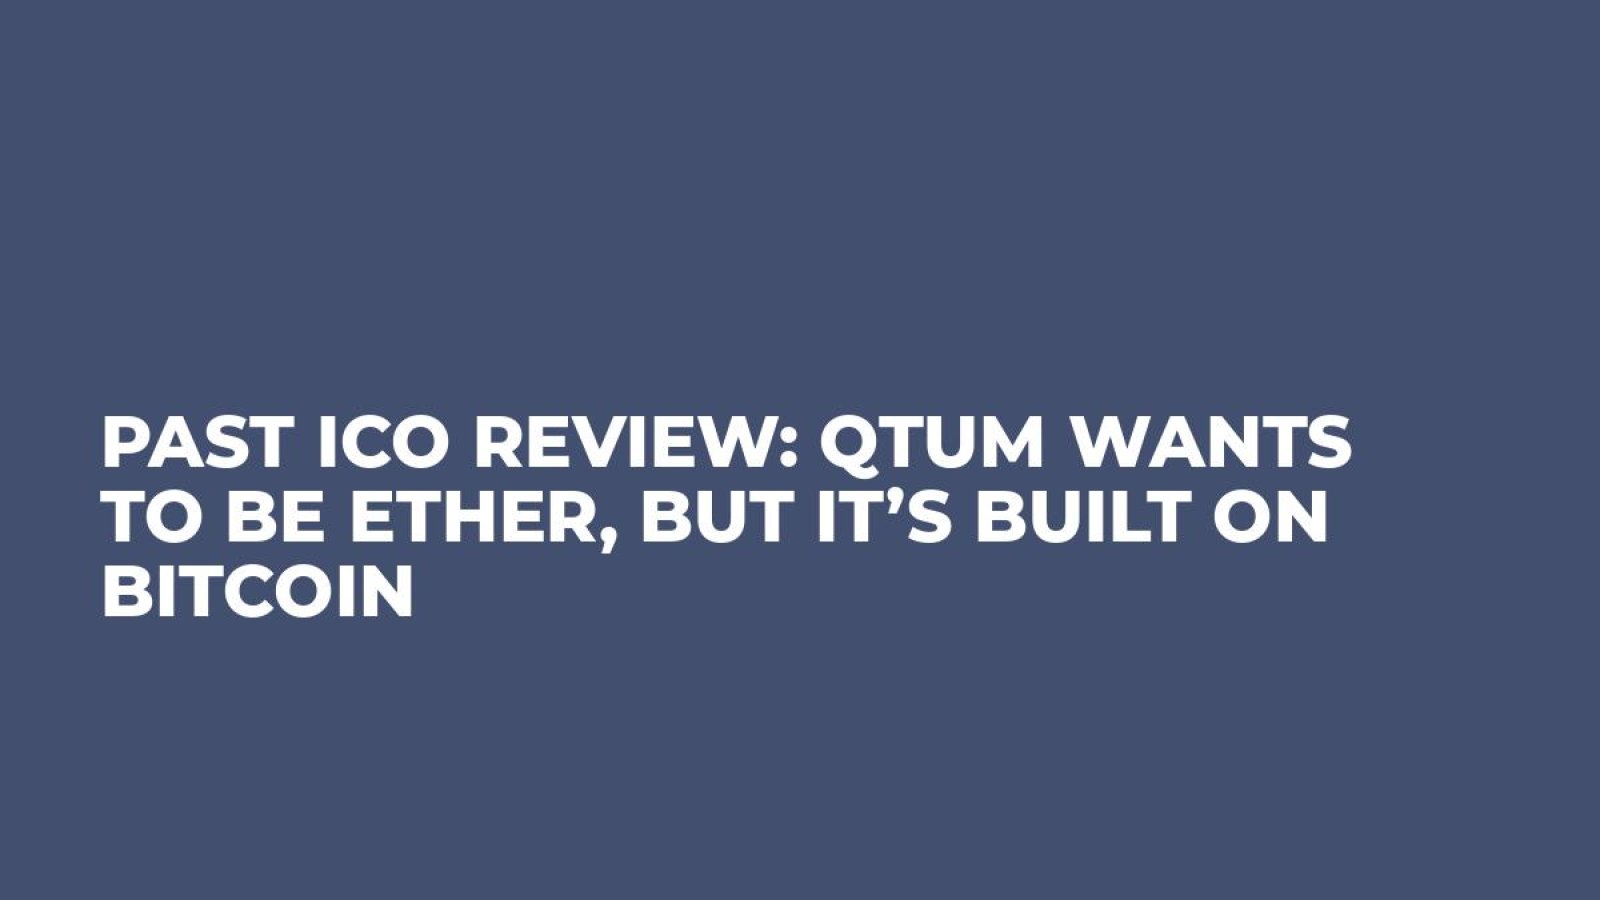 Past ICO Review: Qtum Wants to be Ether, But it’s Built on Bitcoin 